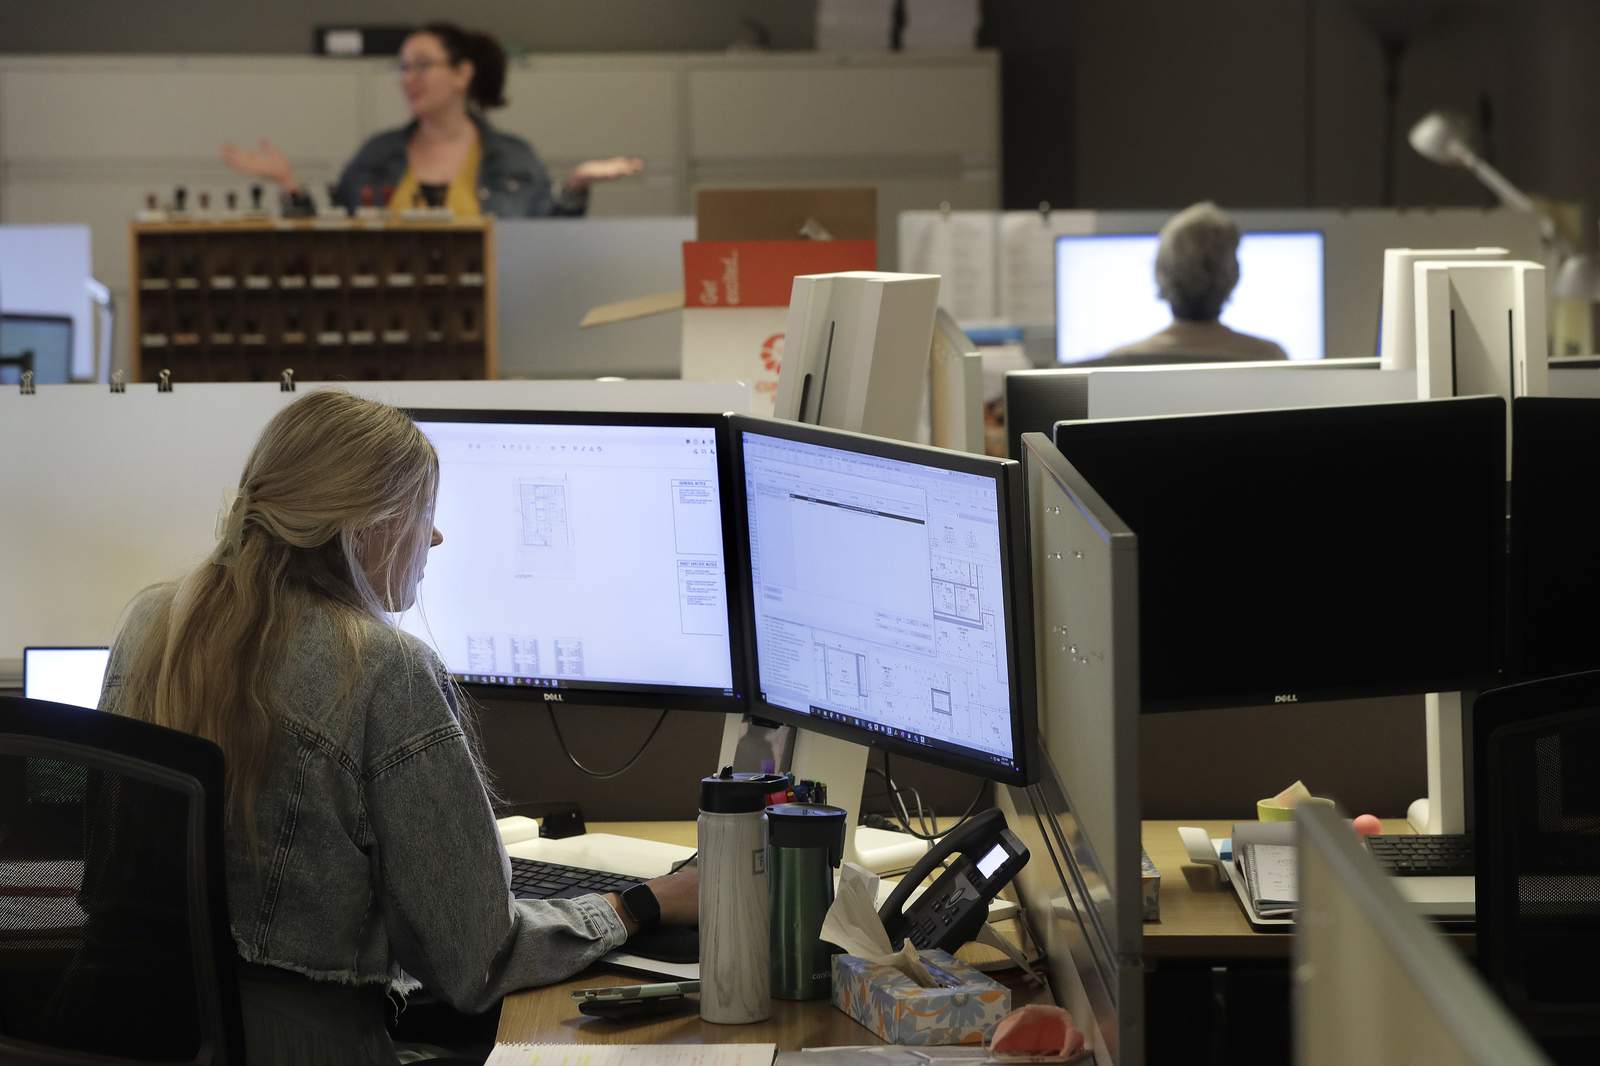 Taller cubicles, one-way aisles: Office workers must adjust